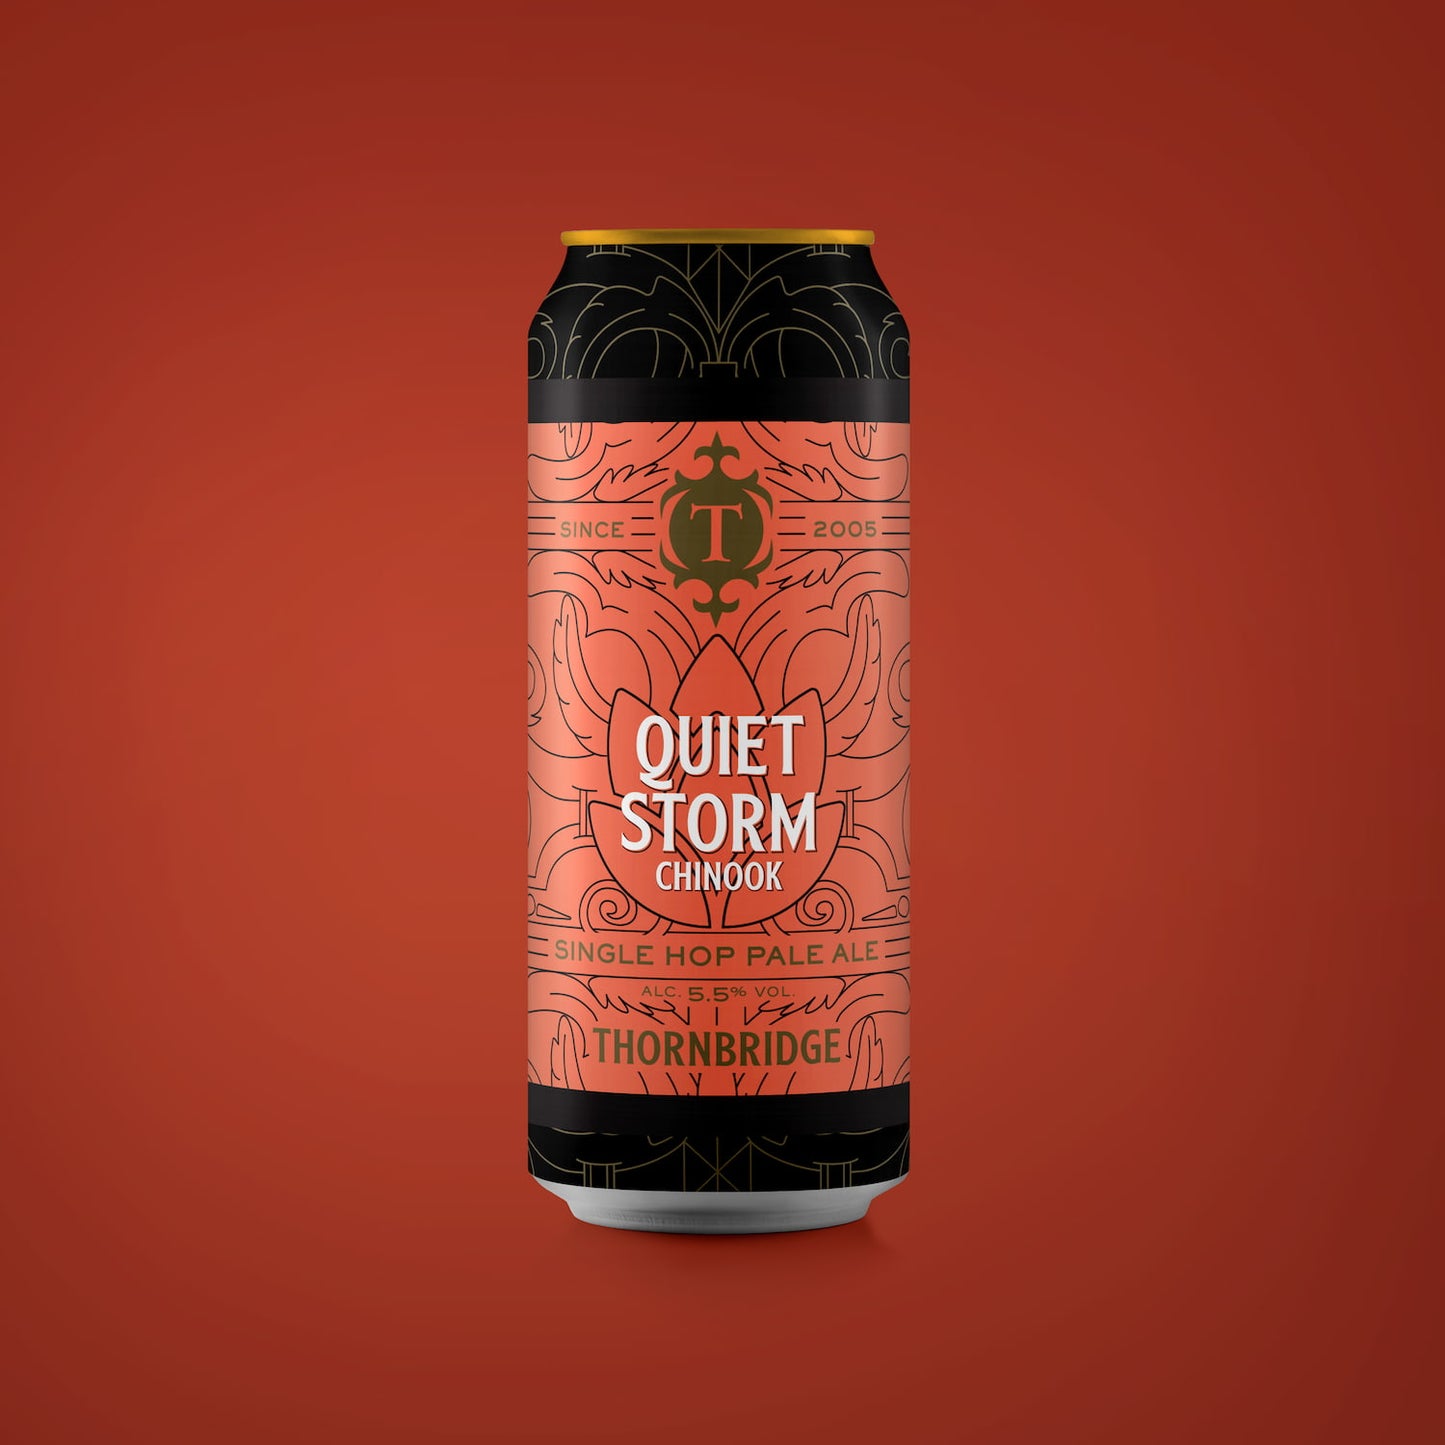 Quiet Storm Chinook, 5.5% Single Hopped Pale Ale Beer - Single Can Thornbridge